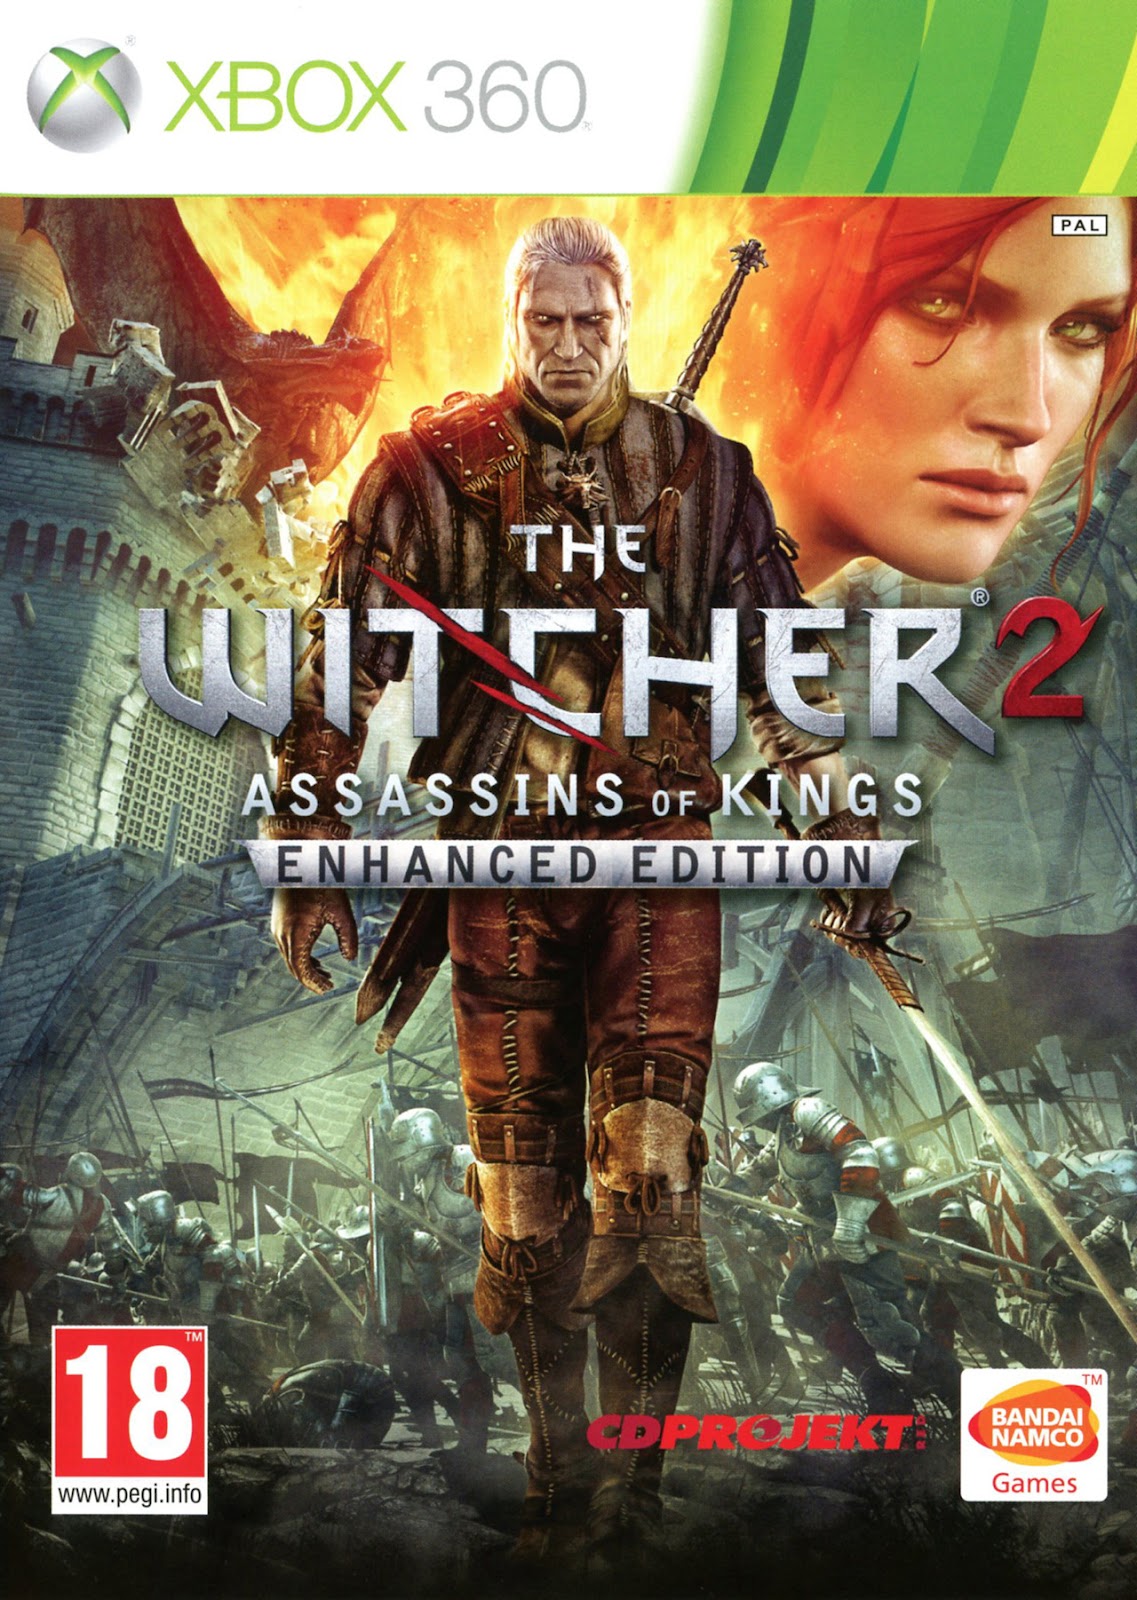 The Witcher 2 Wikipedia The Free